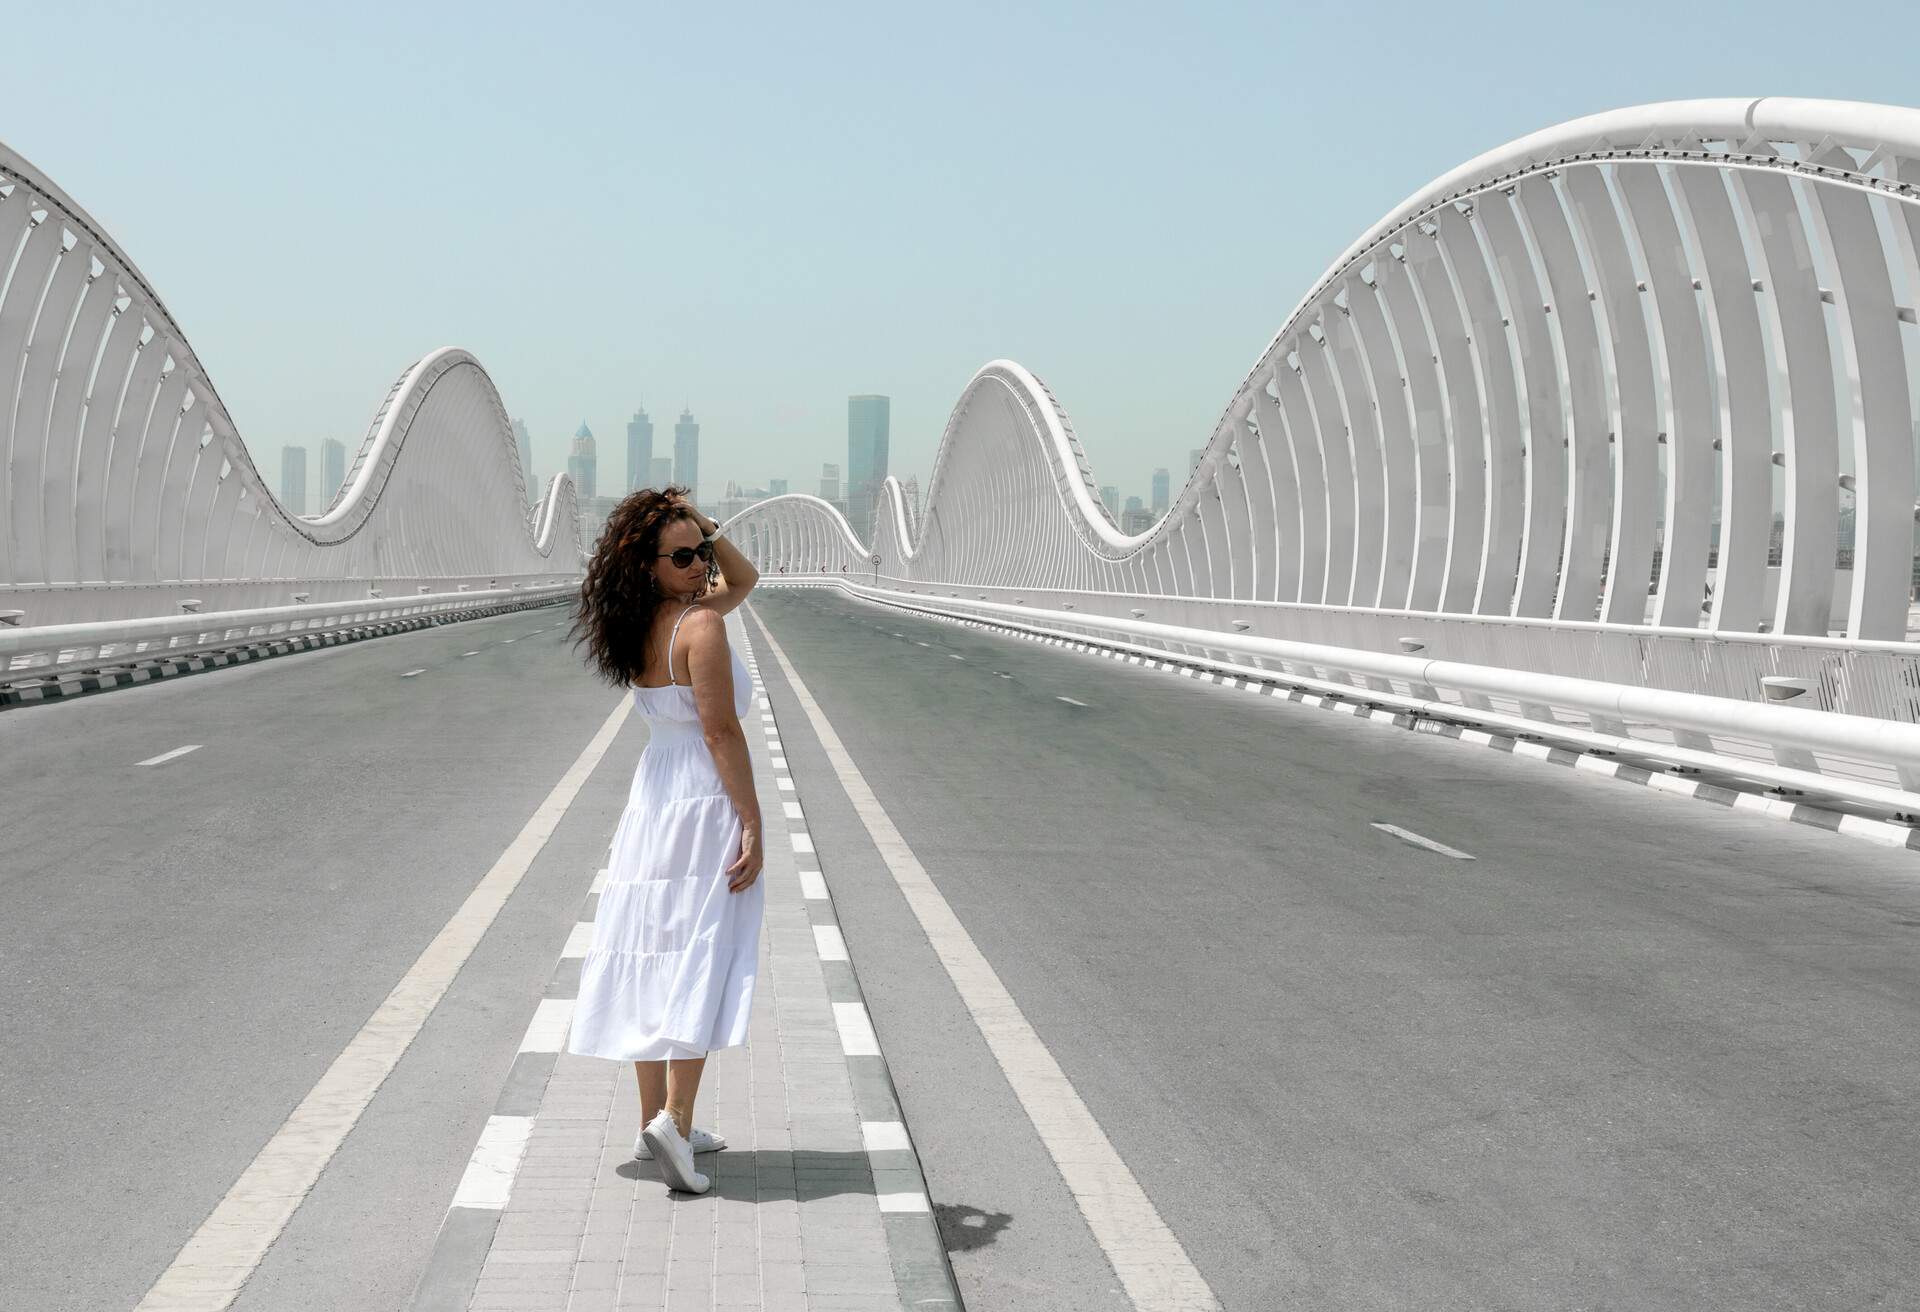 A woman in a white dress poses in the centre of a bridge surrounded by curving safety barriers.